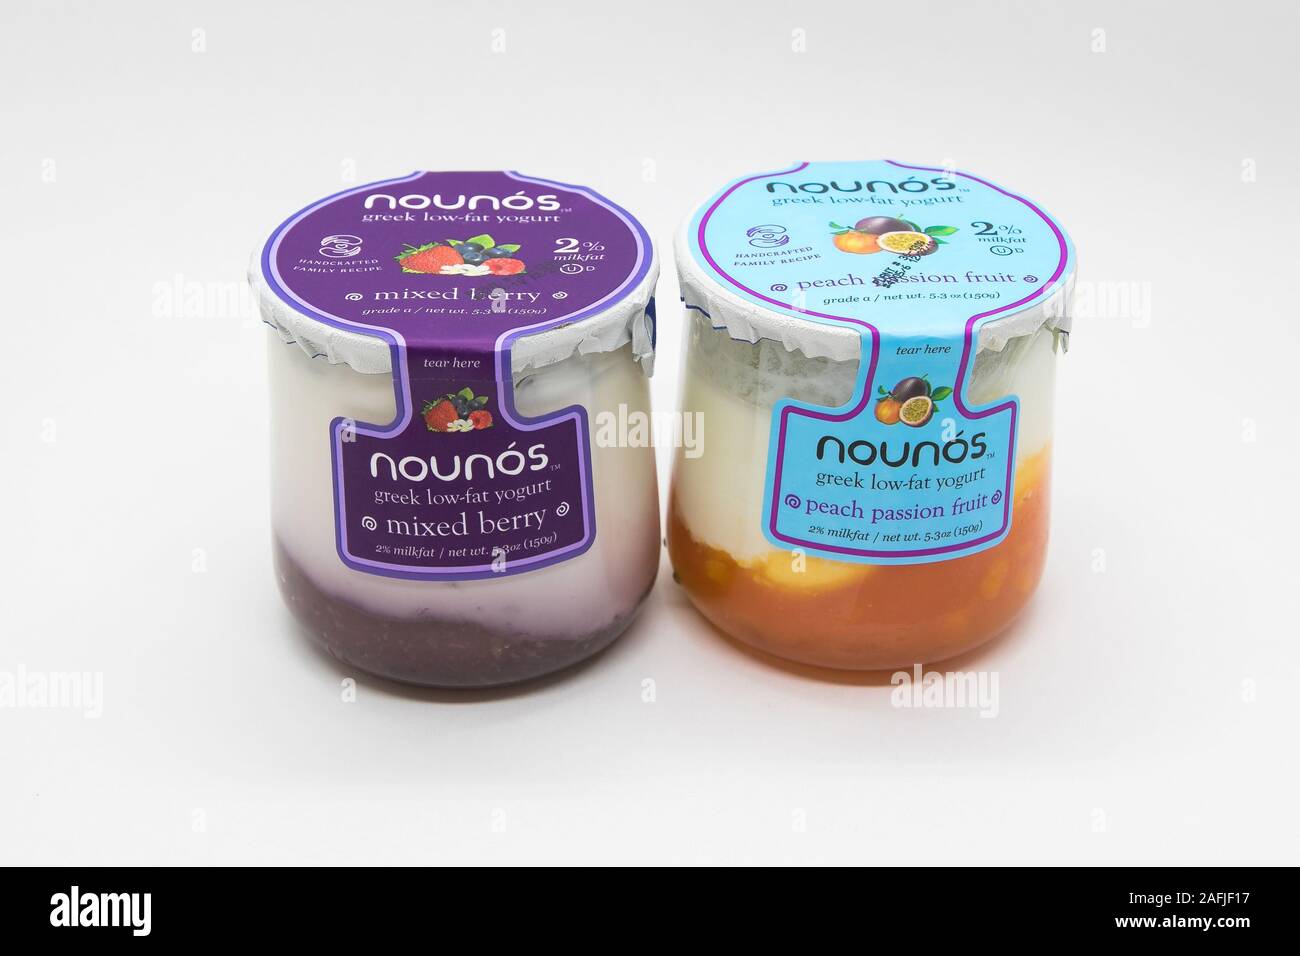 New York, 12/8/2019: Glass containers of Nounos yogurt stand against white background. Stock Photo